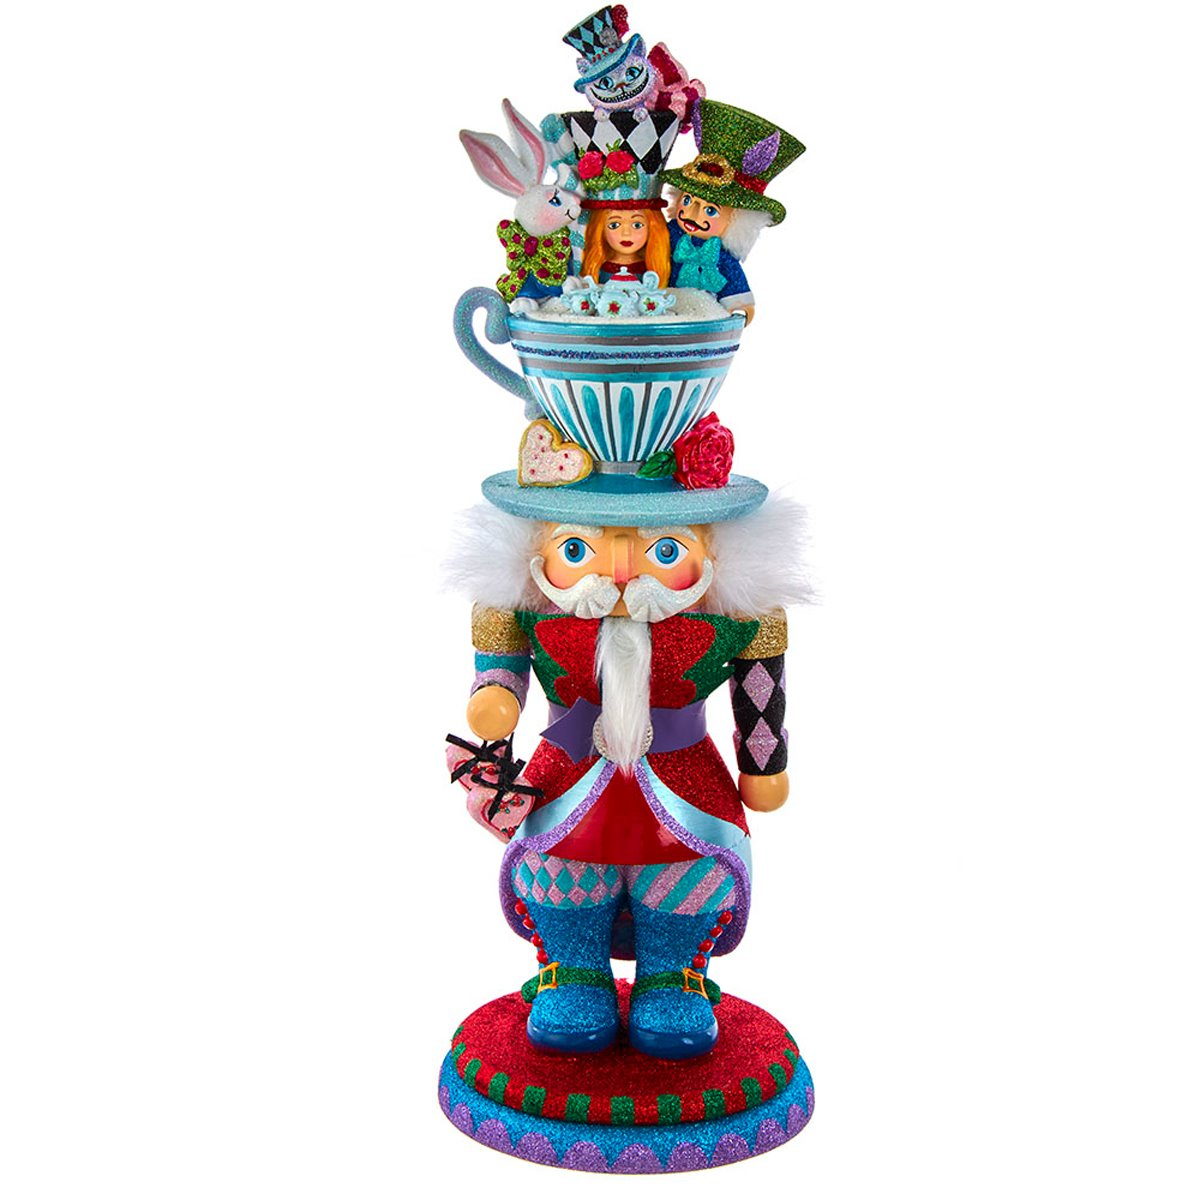 This 18-inch Alice Teacup Hat Nutcracker is inspired by Lewis Carroll's 1865 novel Alice's Adventures in Wonderland. It features a nutcracker in a red, blue, pink and green glittered color scheme standing on a matching glittered base, His glittered teacup hat is filled with characters from the beloved novel and is decorated with a hear and red rose.